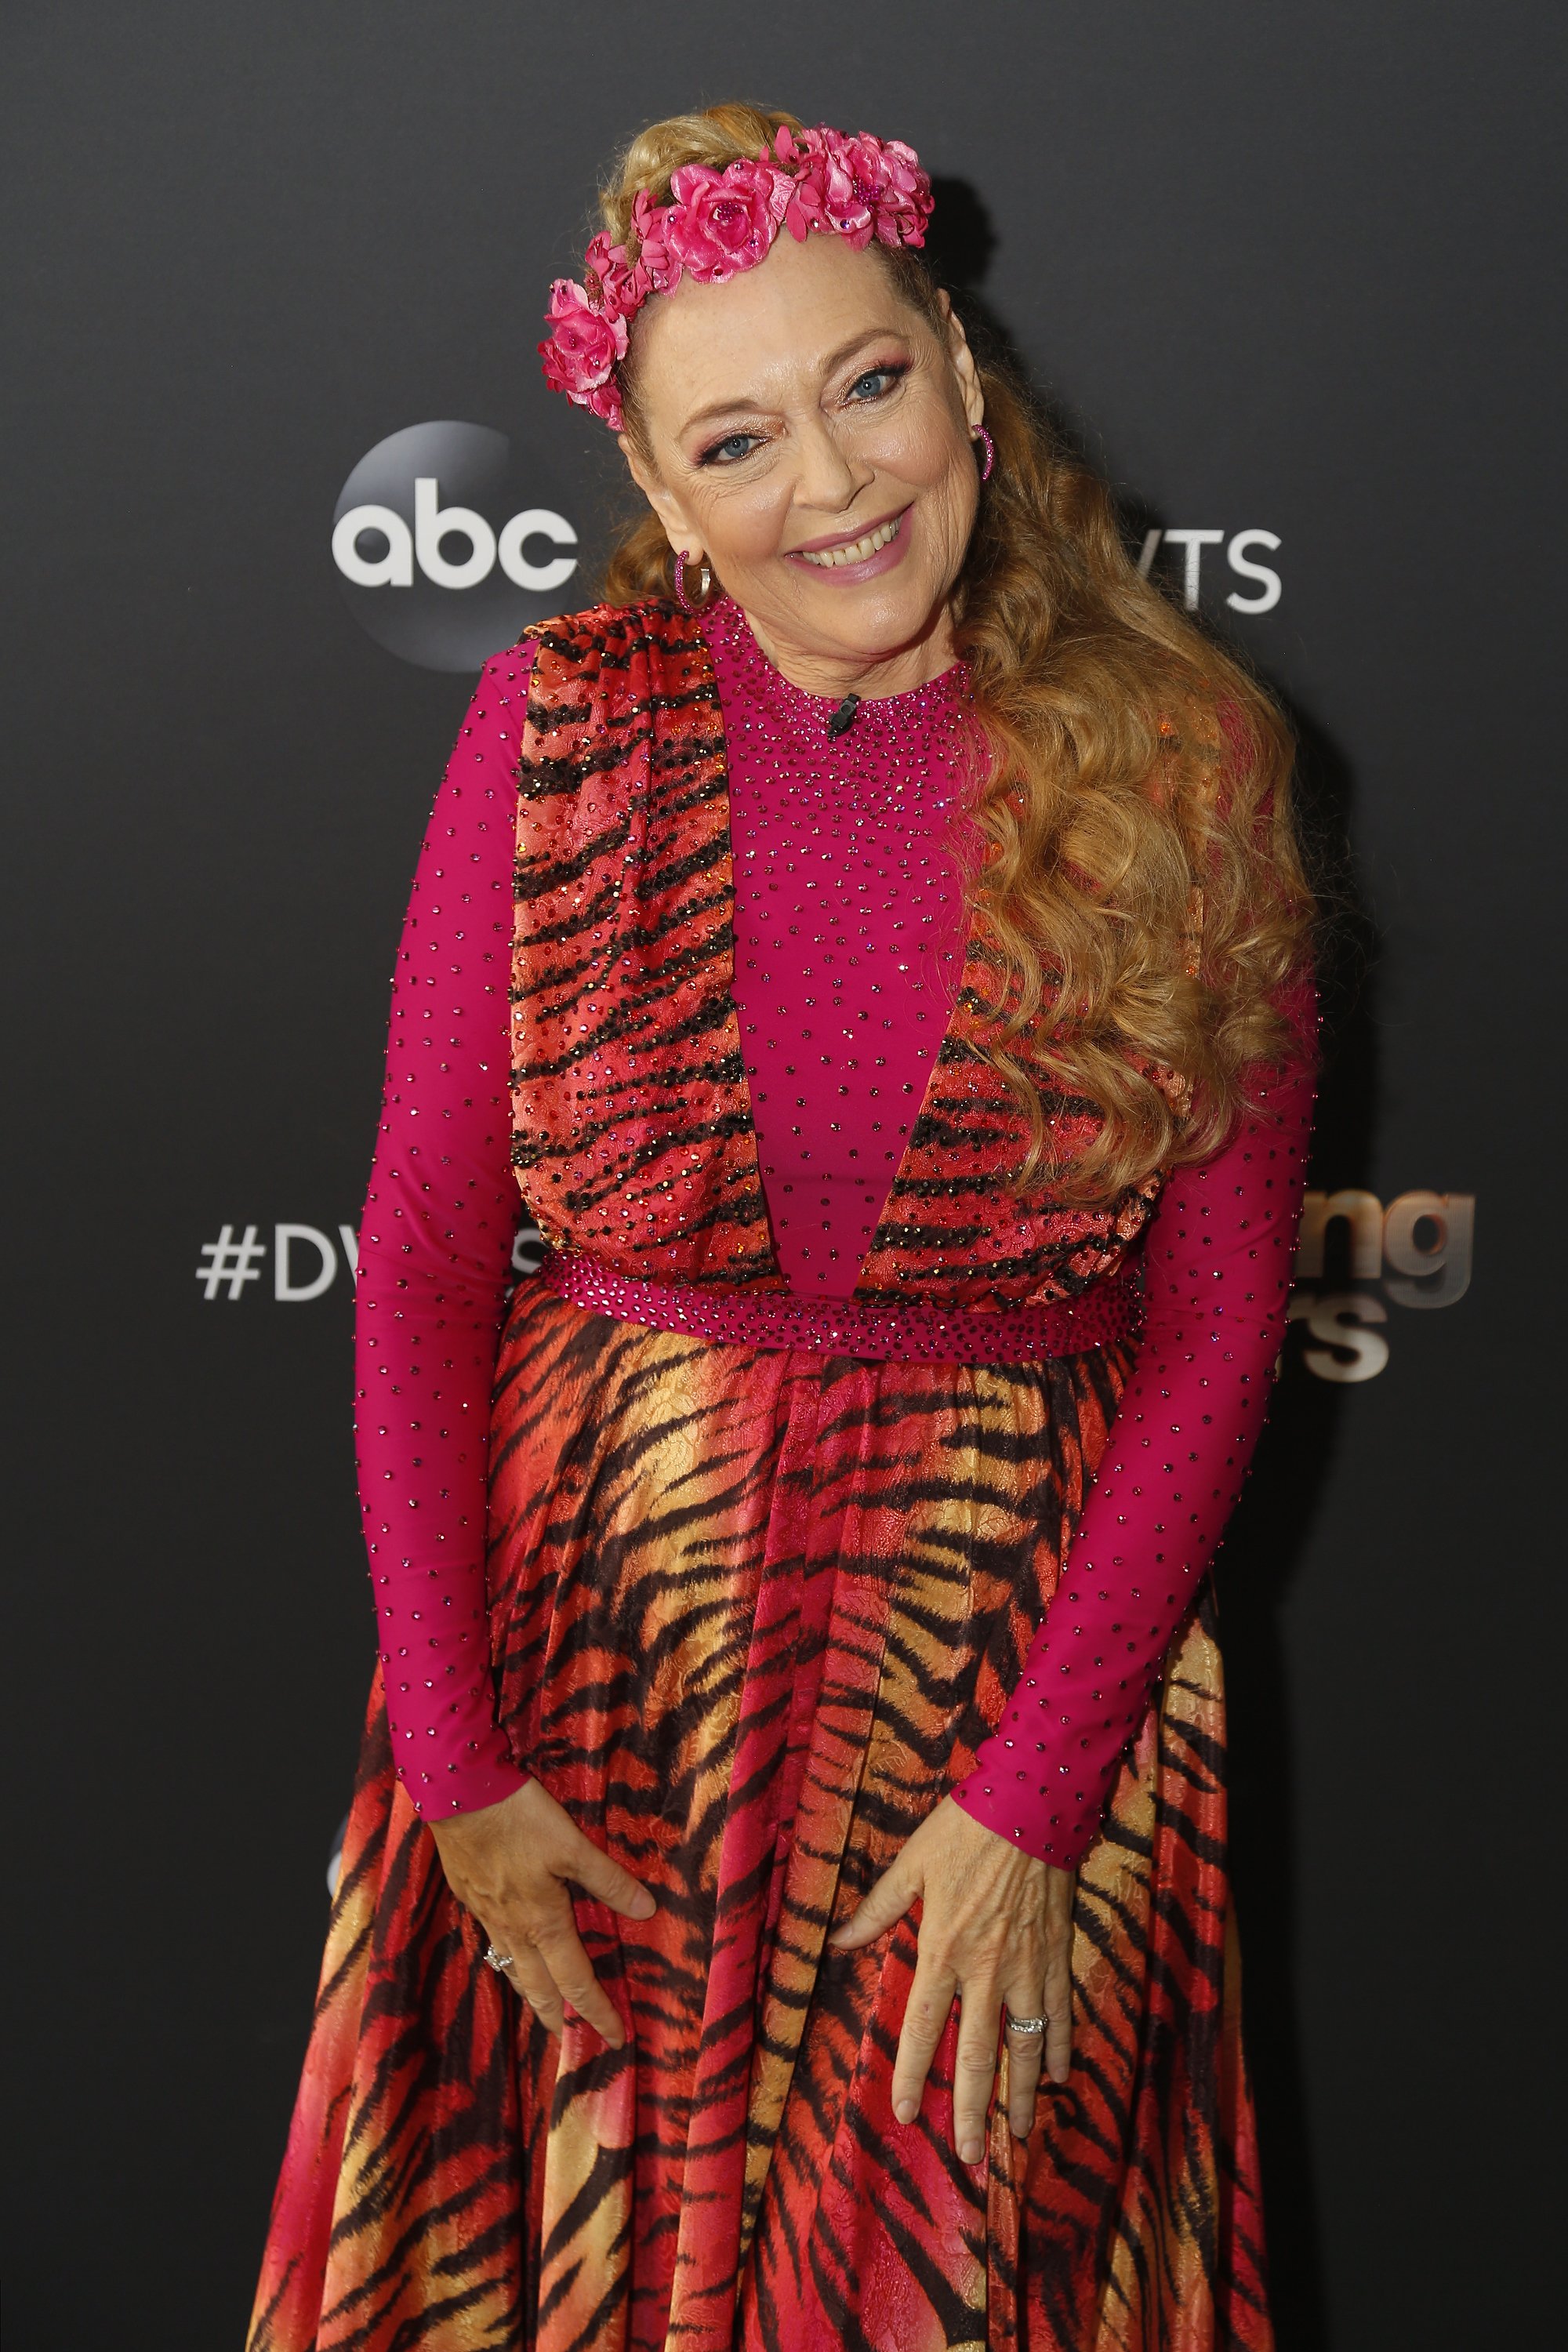 Carole Baskin during the premiere of season 29 of "Dancing with the Stars" on September 14, 2020. | Source: Getty Images.